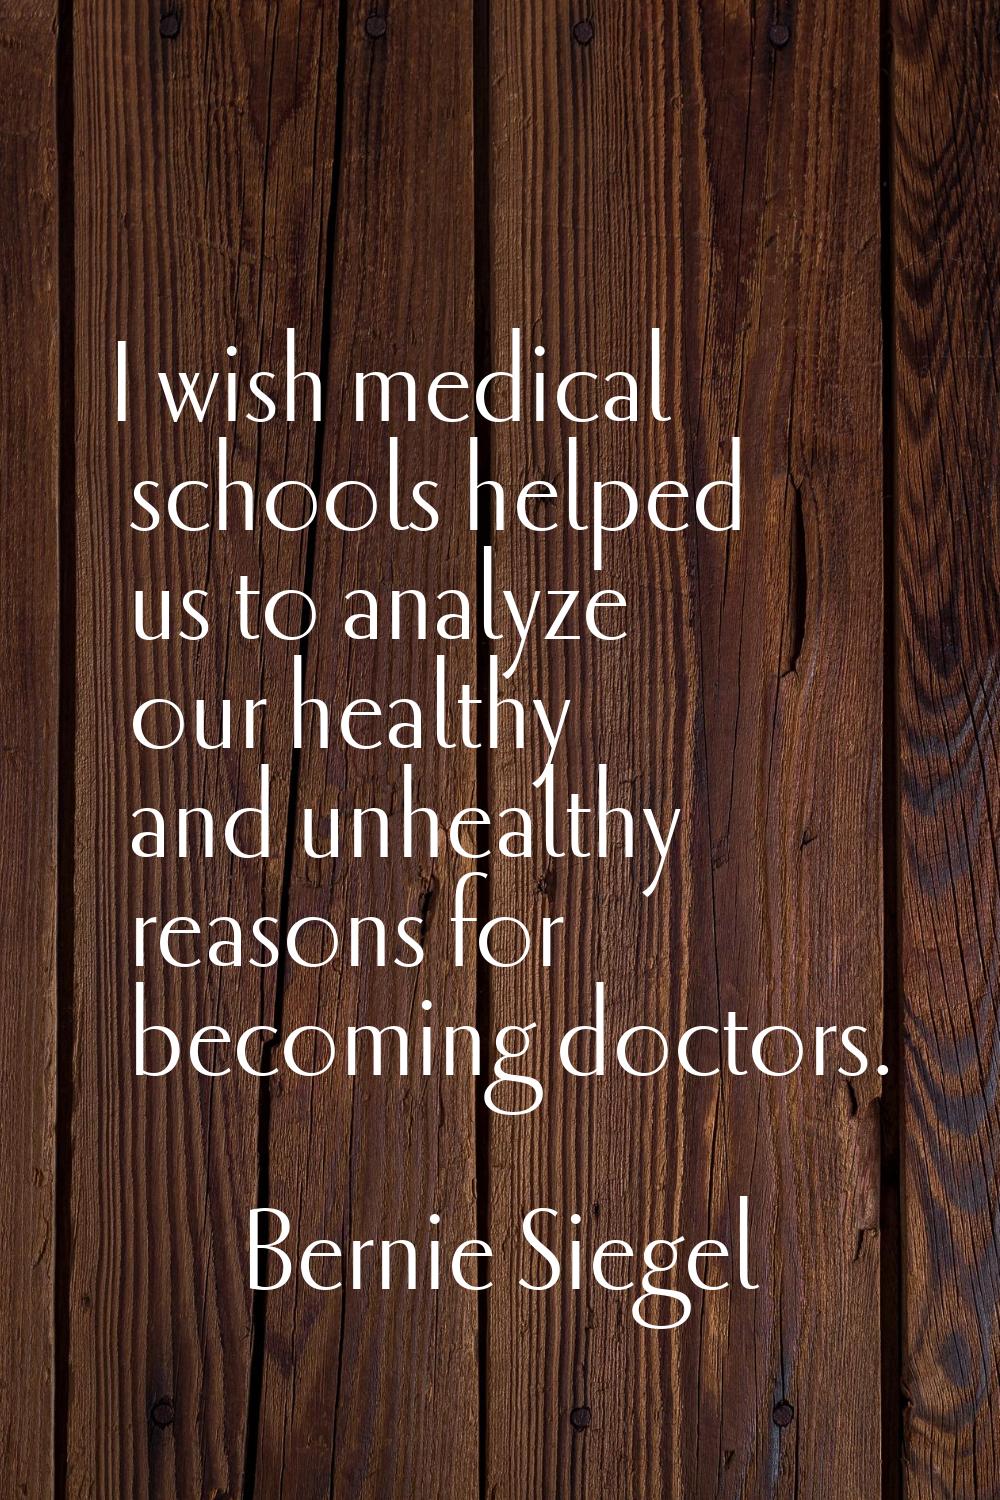 I wish medical schools helped us to analyze our healthy and unhealthy reasons for becoming doctors.